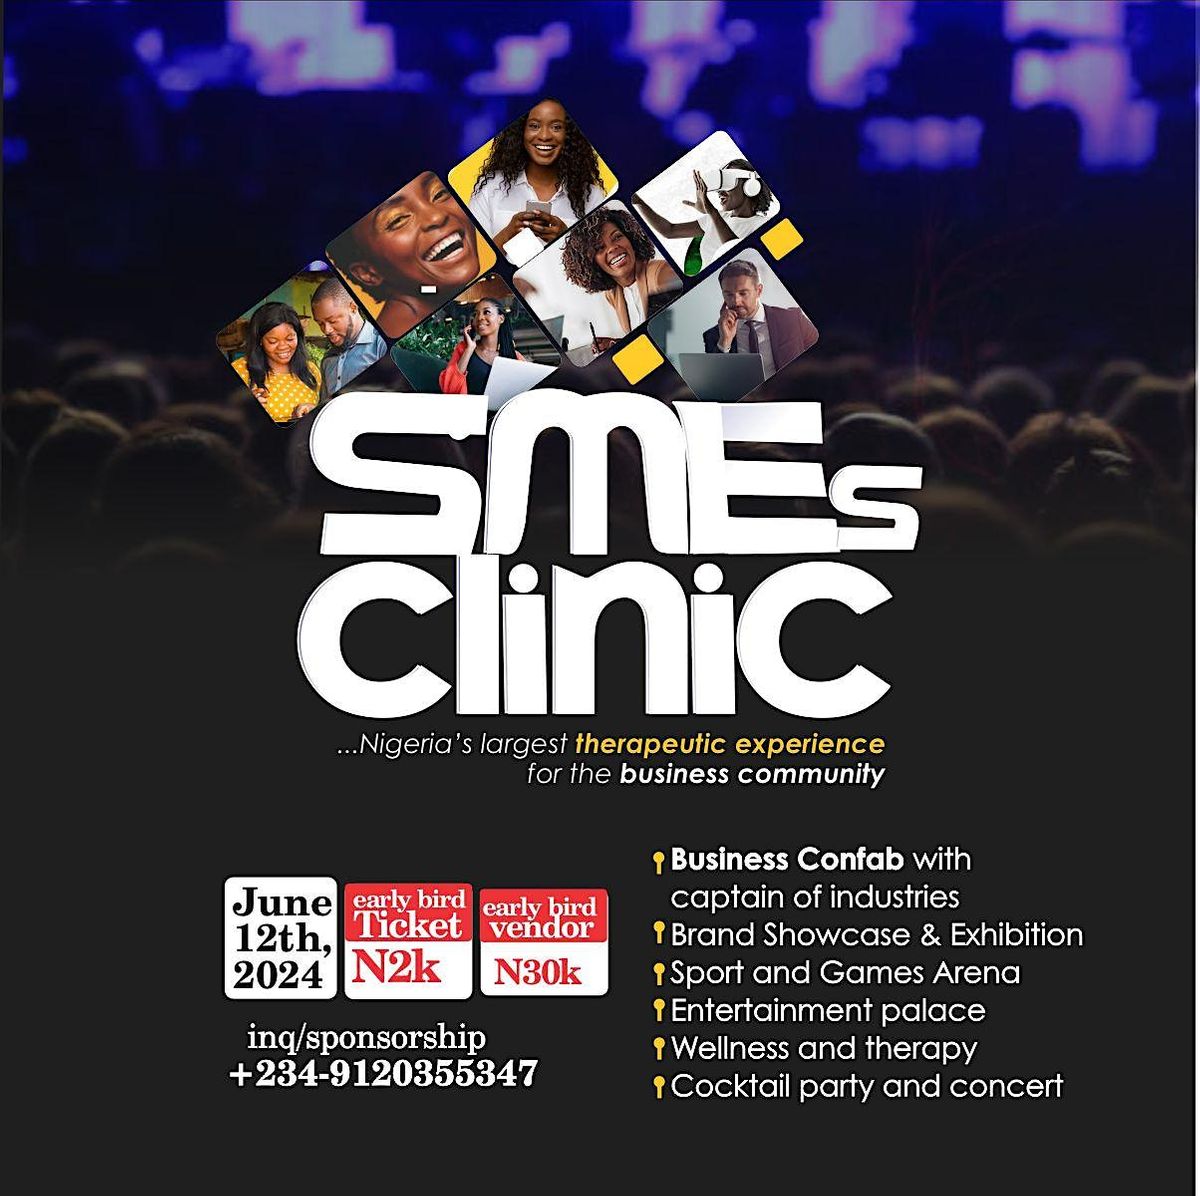 SMEs CLINIC 2024